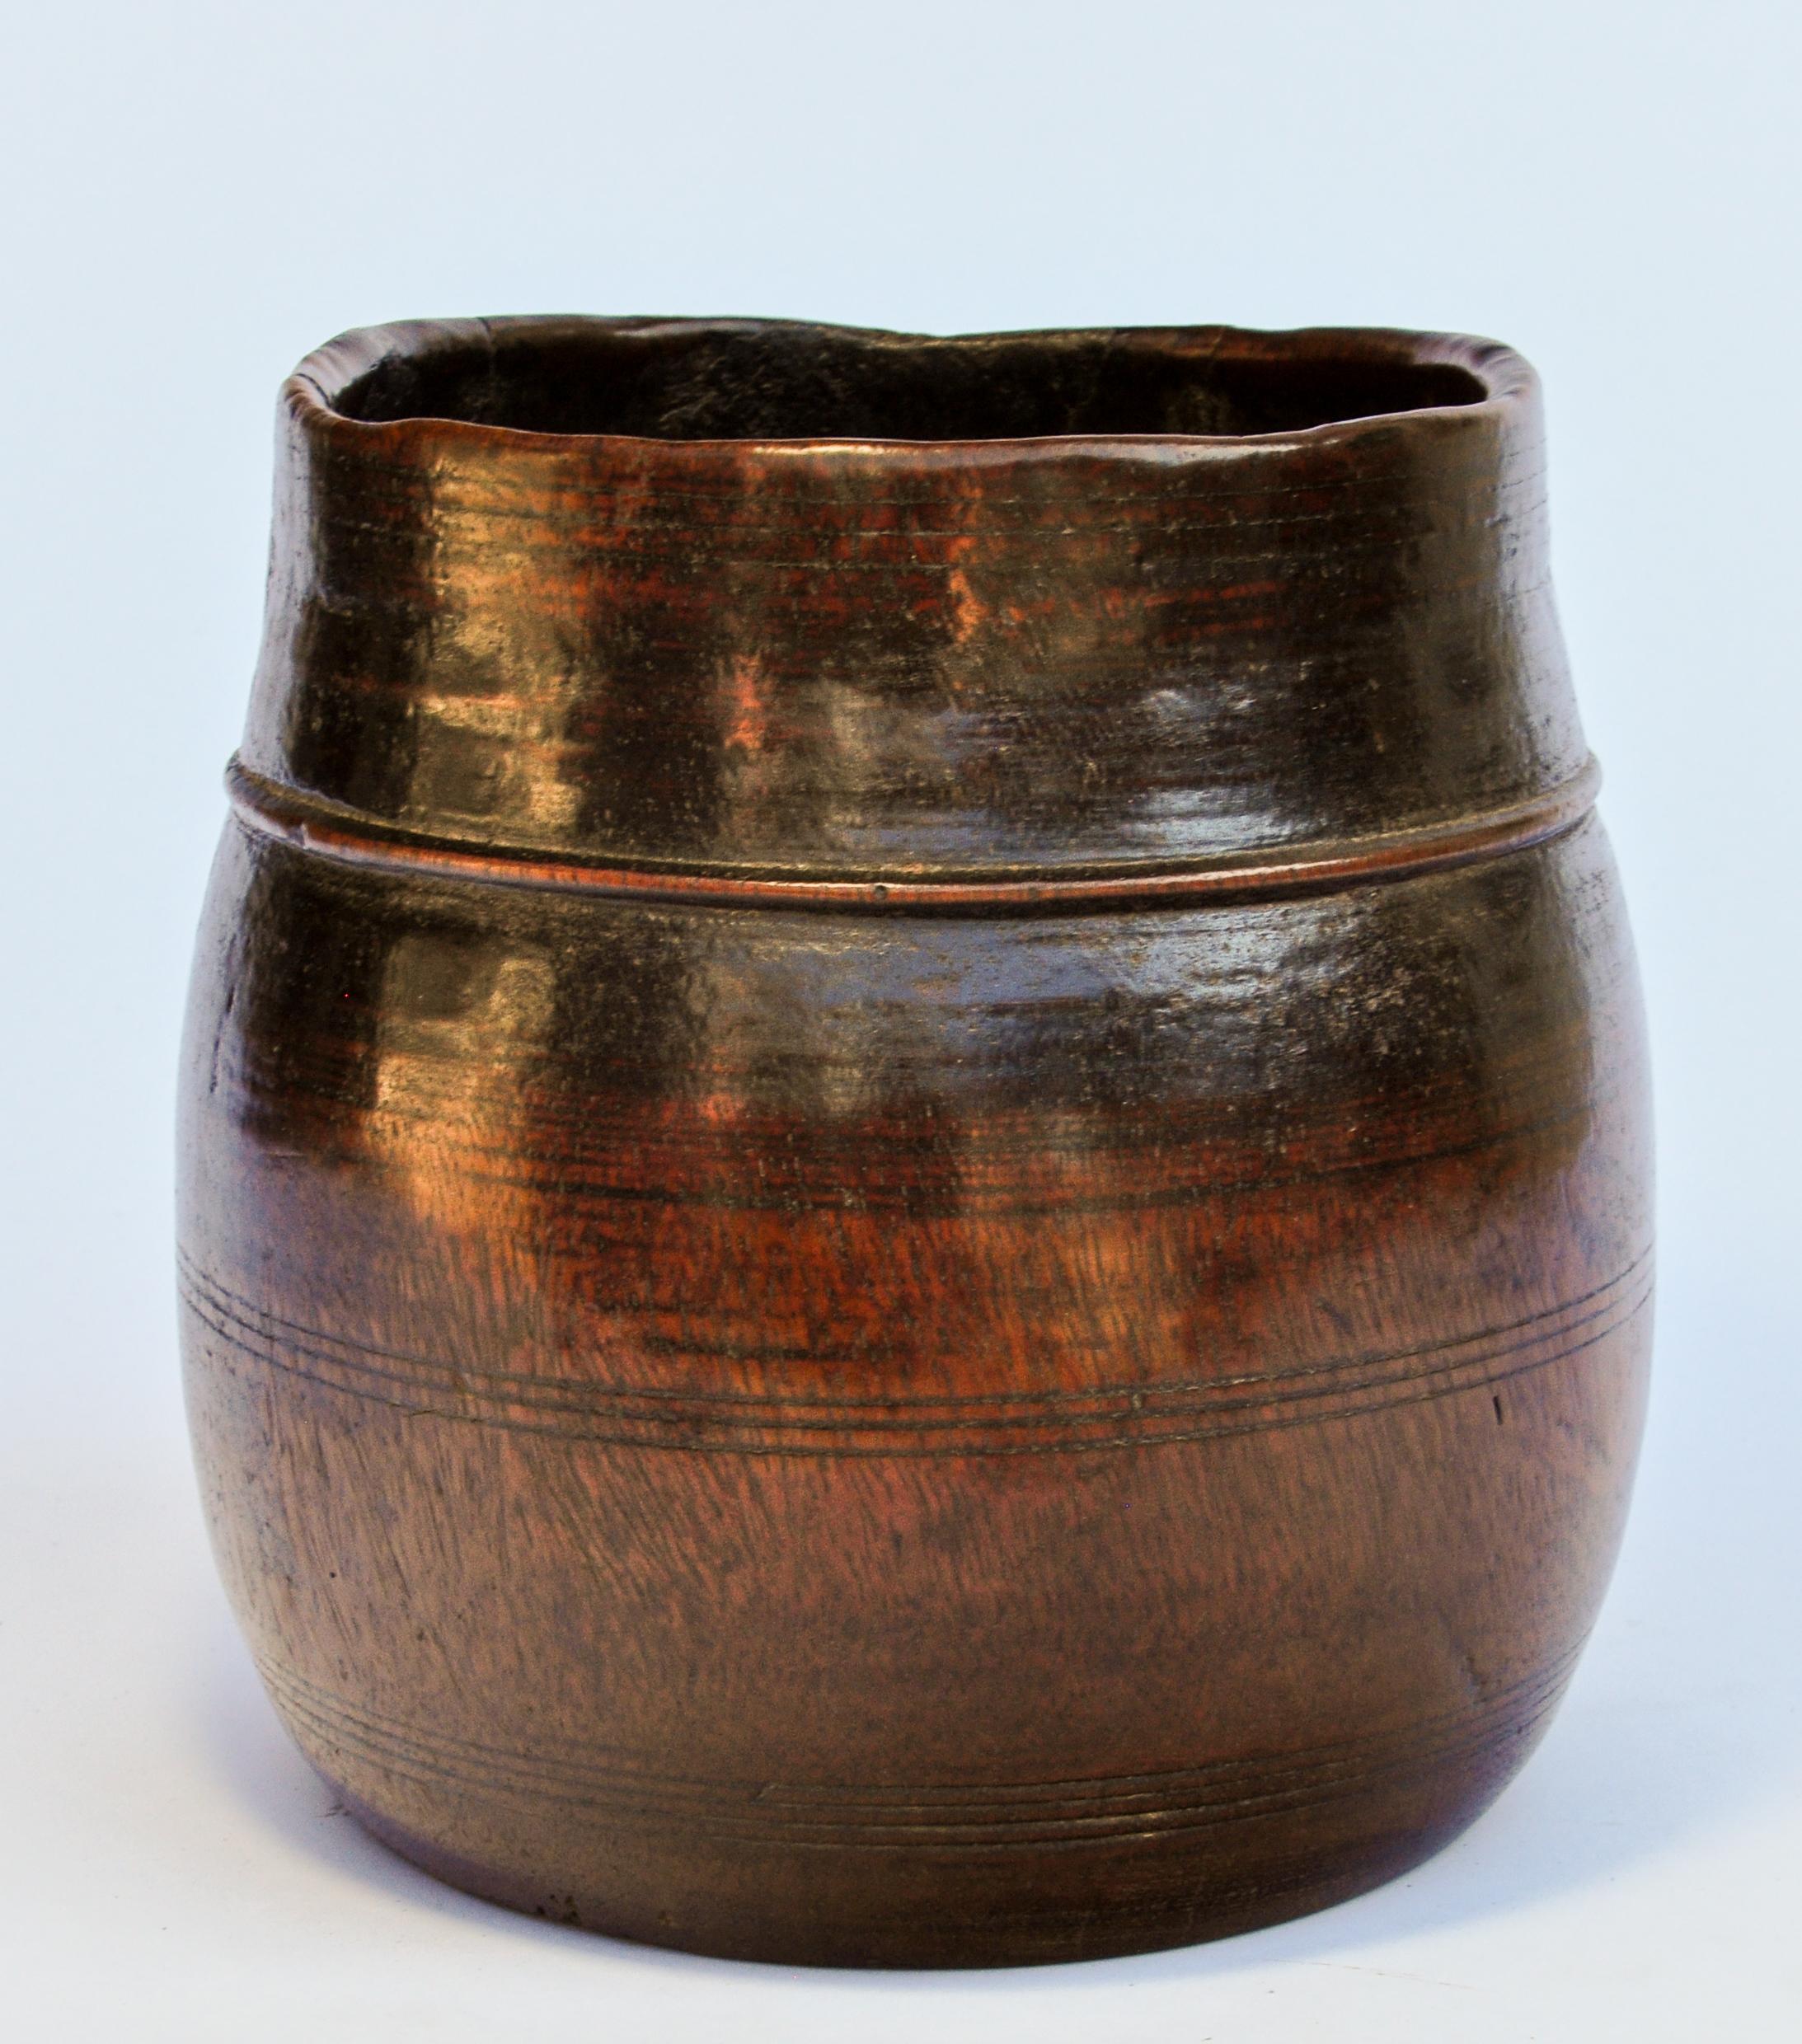 Rustic Vintage Wooden Grain Measure Pot from the Mountains of Nepal, Mid-20th Century